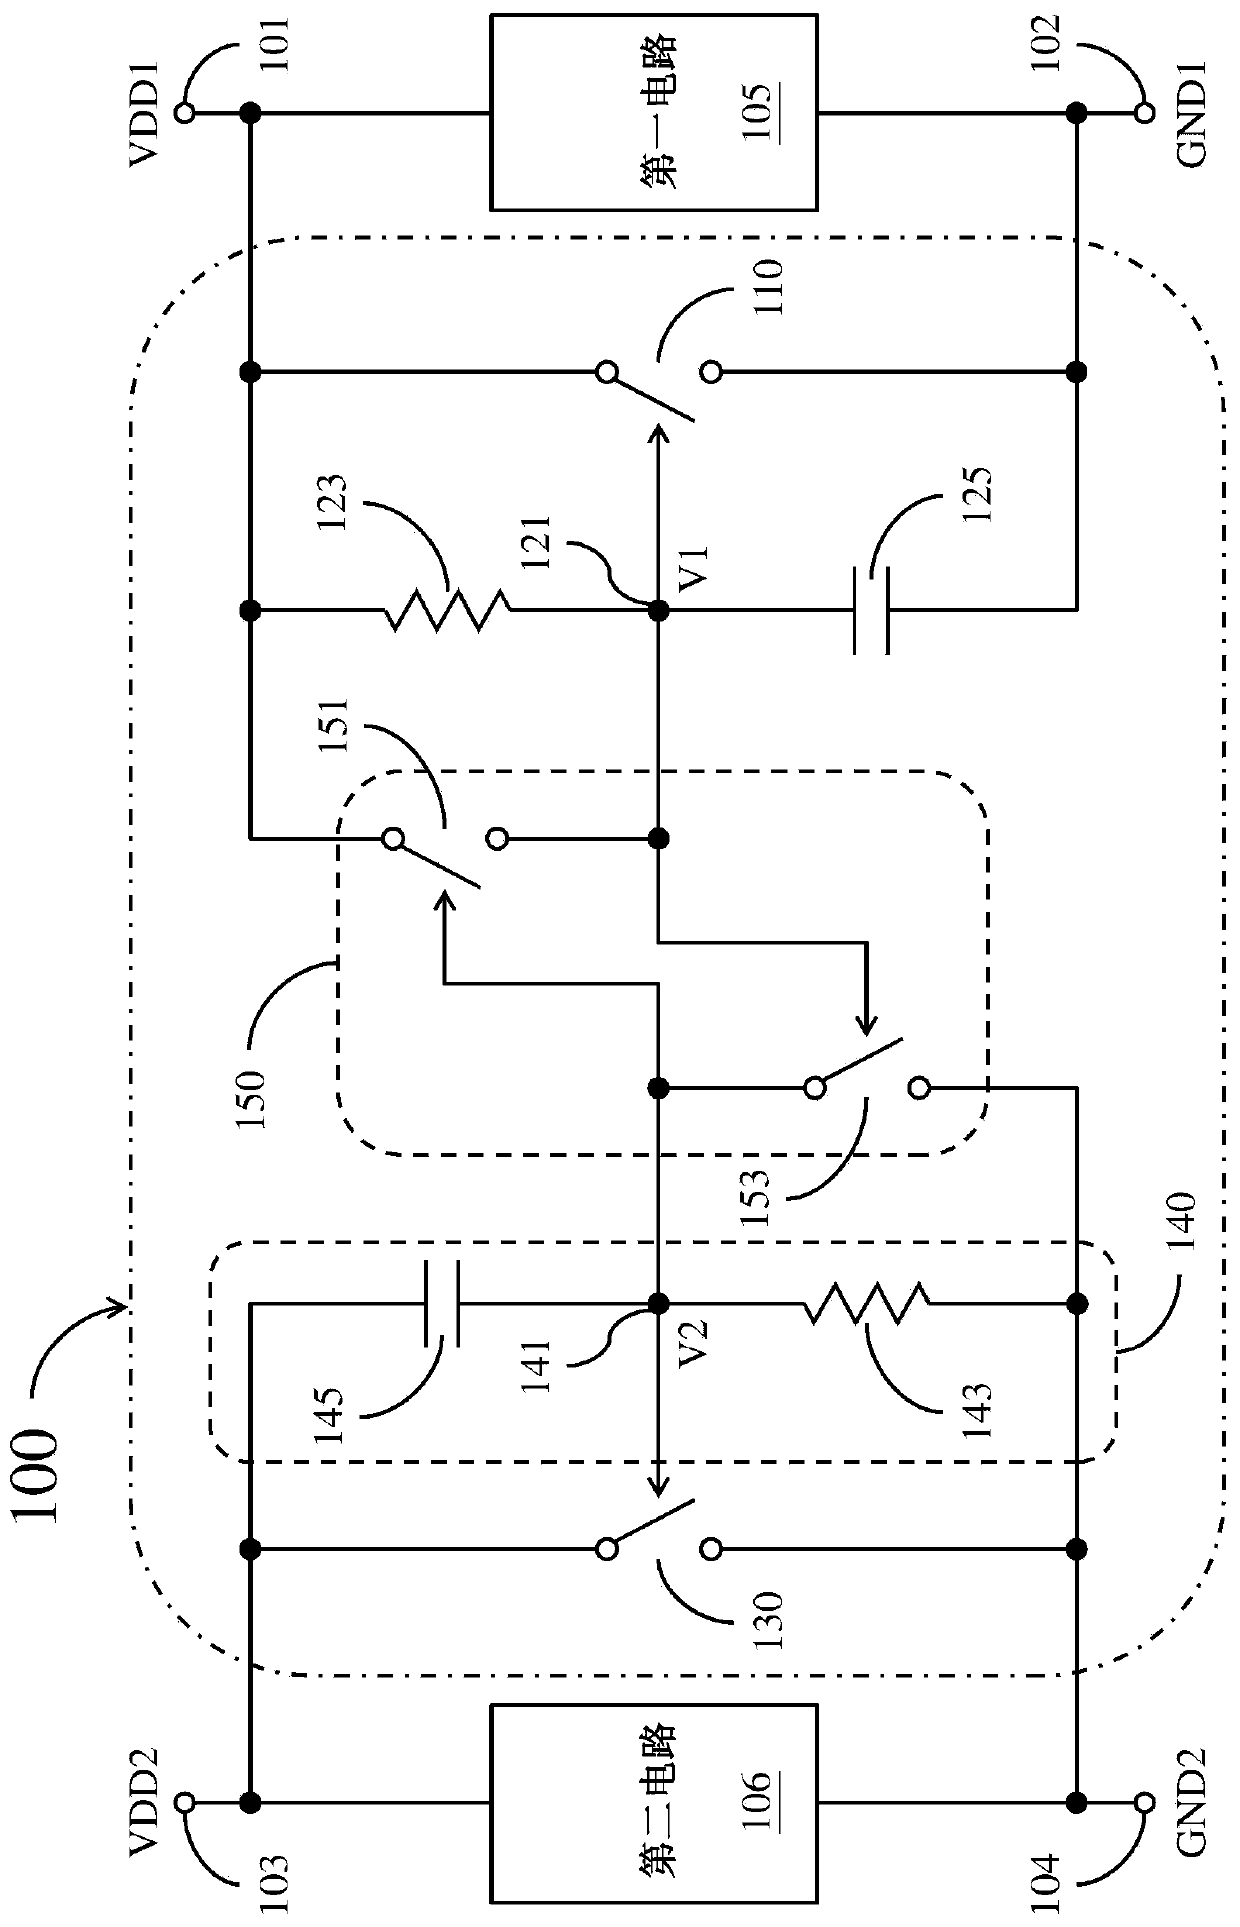 Electrostatic Discharge Protection Circuits Across Power Domains